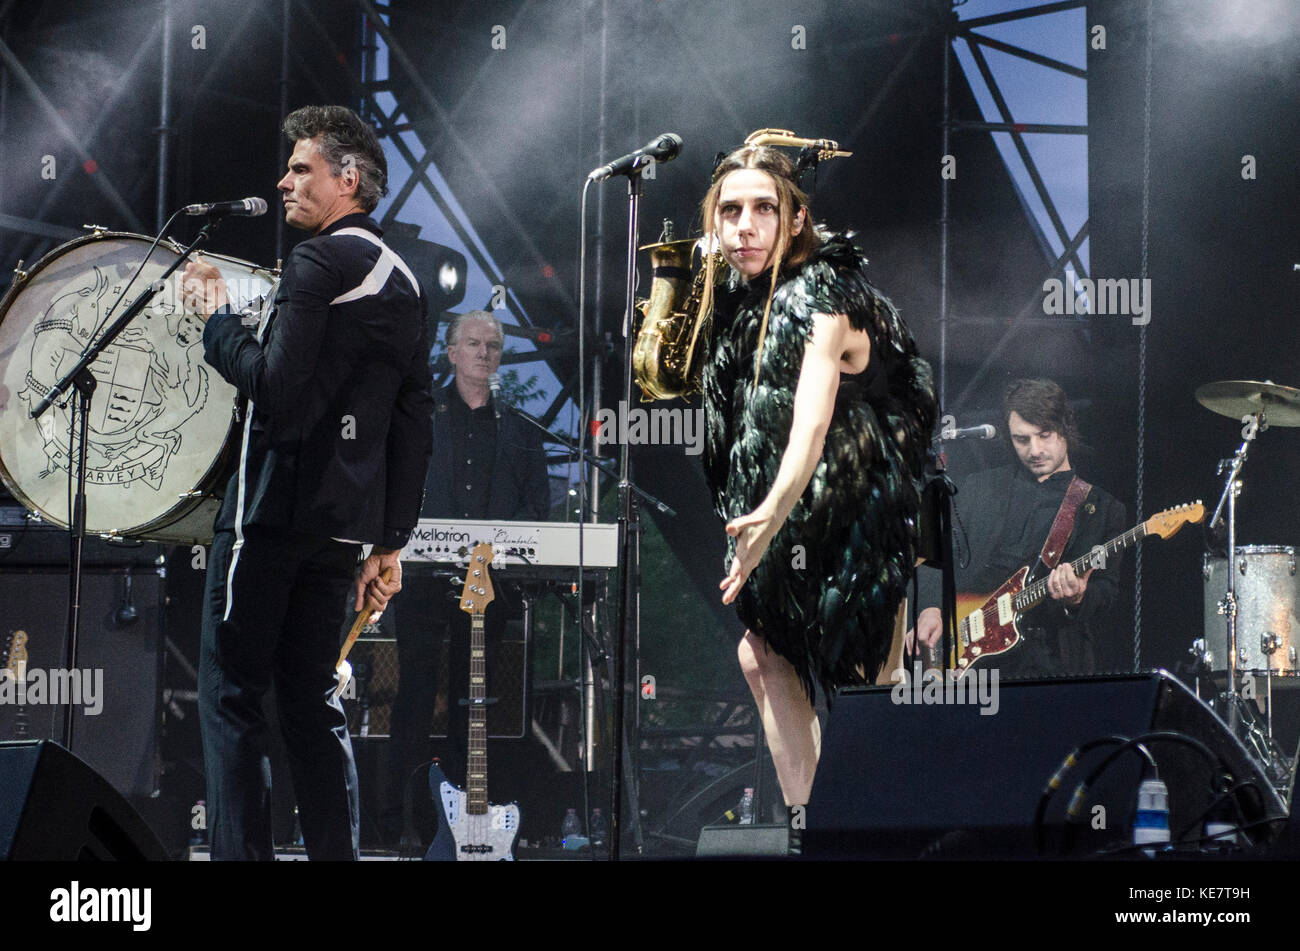 Turin,Italy-August 25, 2017: PJ Harvey performs live at the Todays festival on August 25, 2017 in Turin, Italy Stock Photo